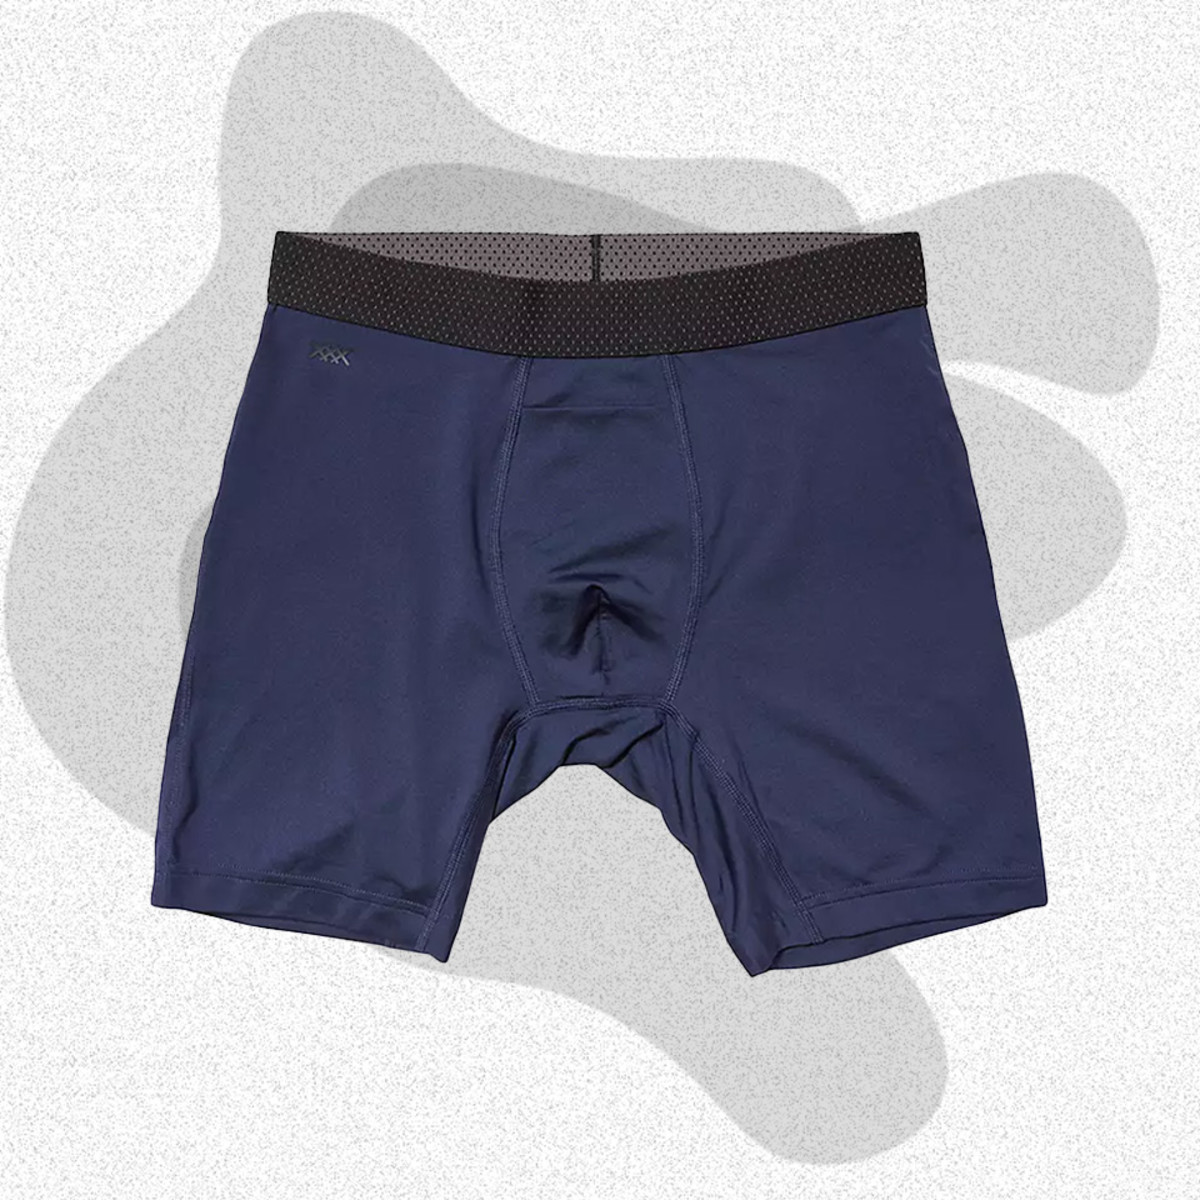 5 Crucial Hacks To Buy Underwear For The Gym